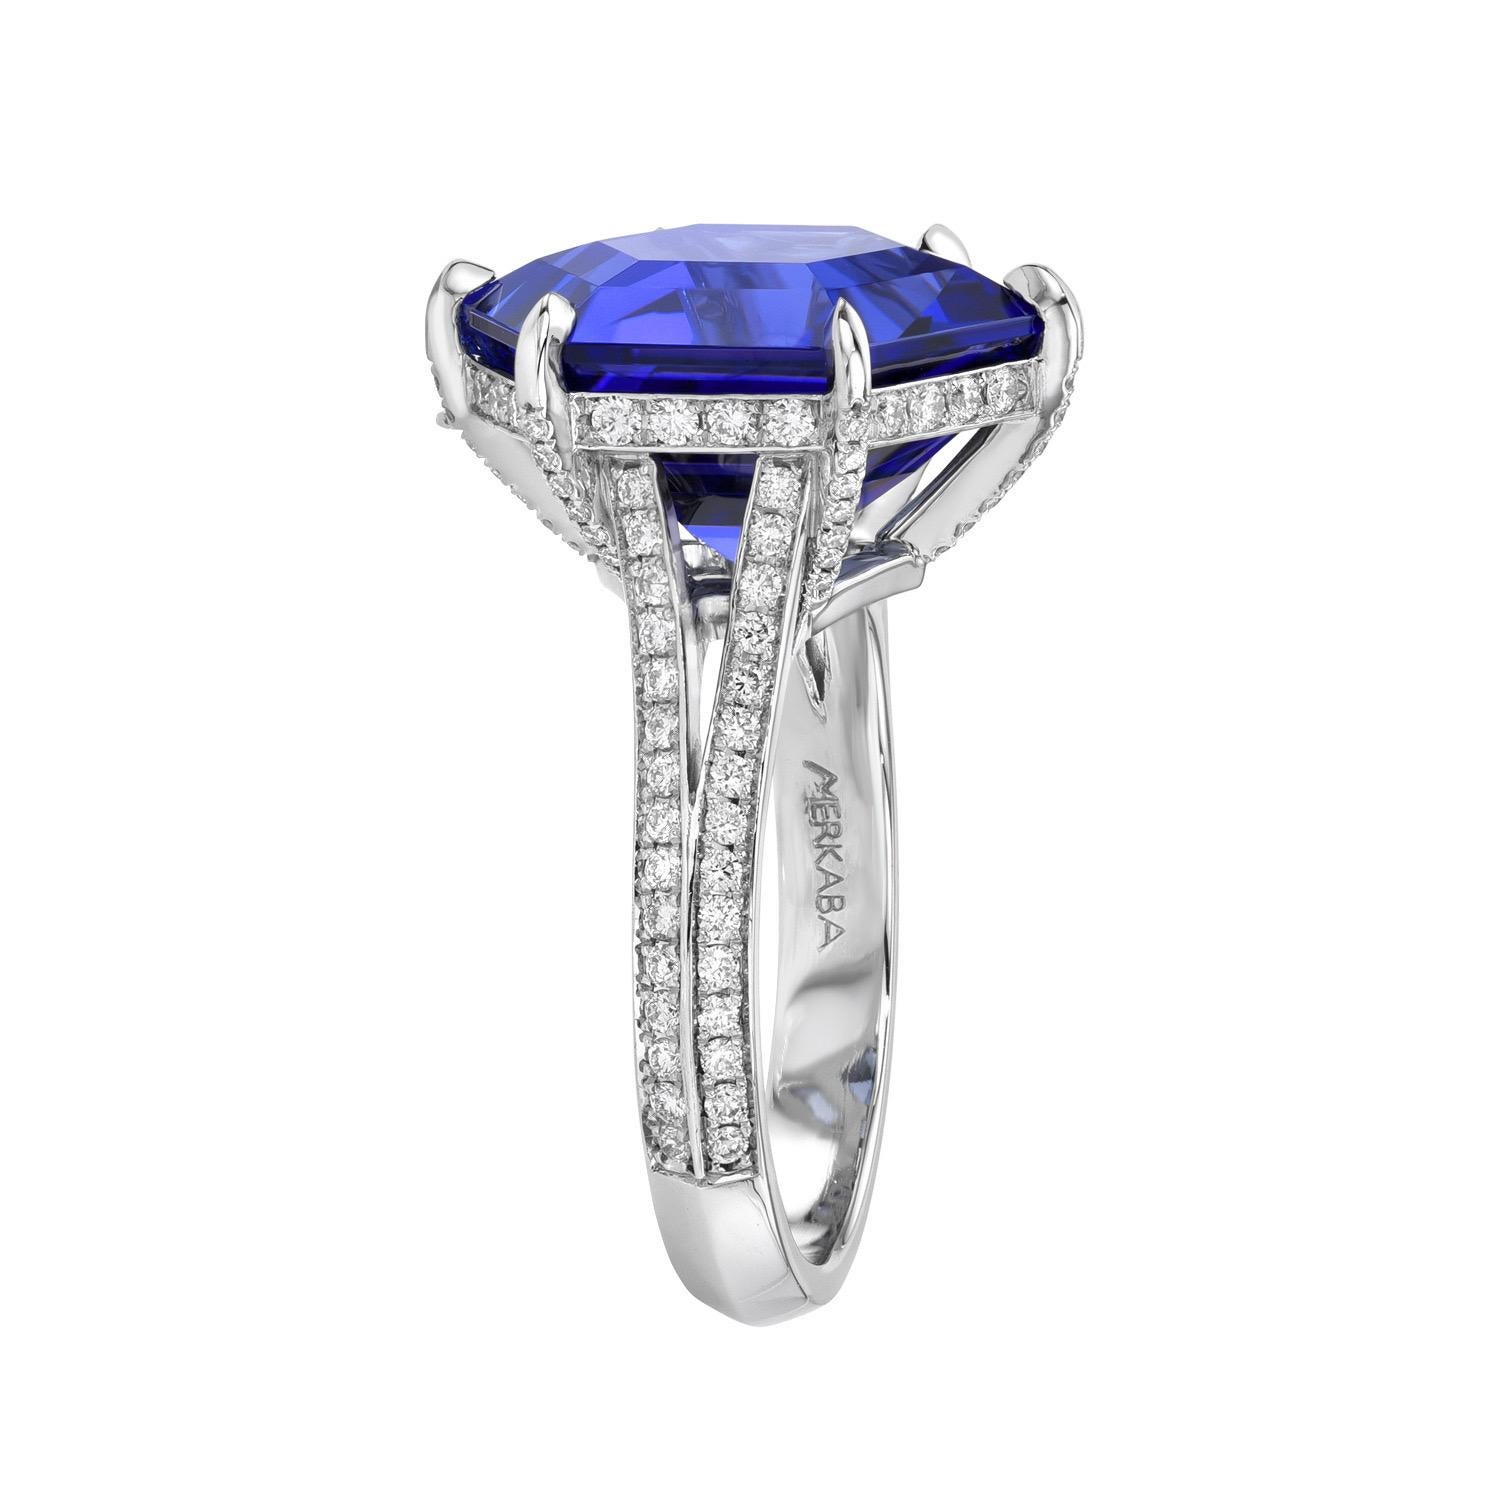 Remarkable one-of-a-kind 10.21 carat Tanzanite Hexagon platinum ring, decorated with a total of 0.61 carat round brilliant collection diamonds.
Tanzanite dimensions: 15.2 x 12.9 x 8.4 mm. 
Ring size 6.5. Resizing is complementary upon